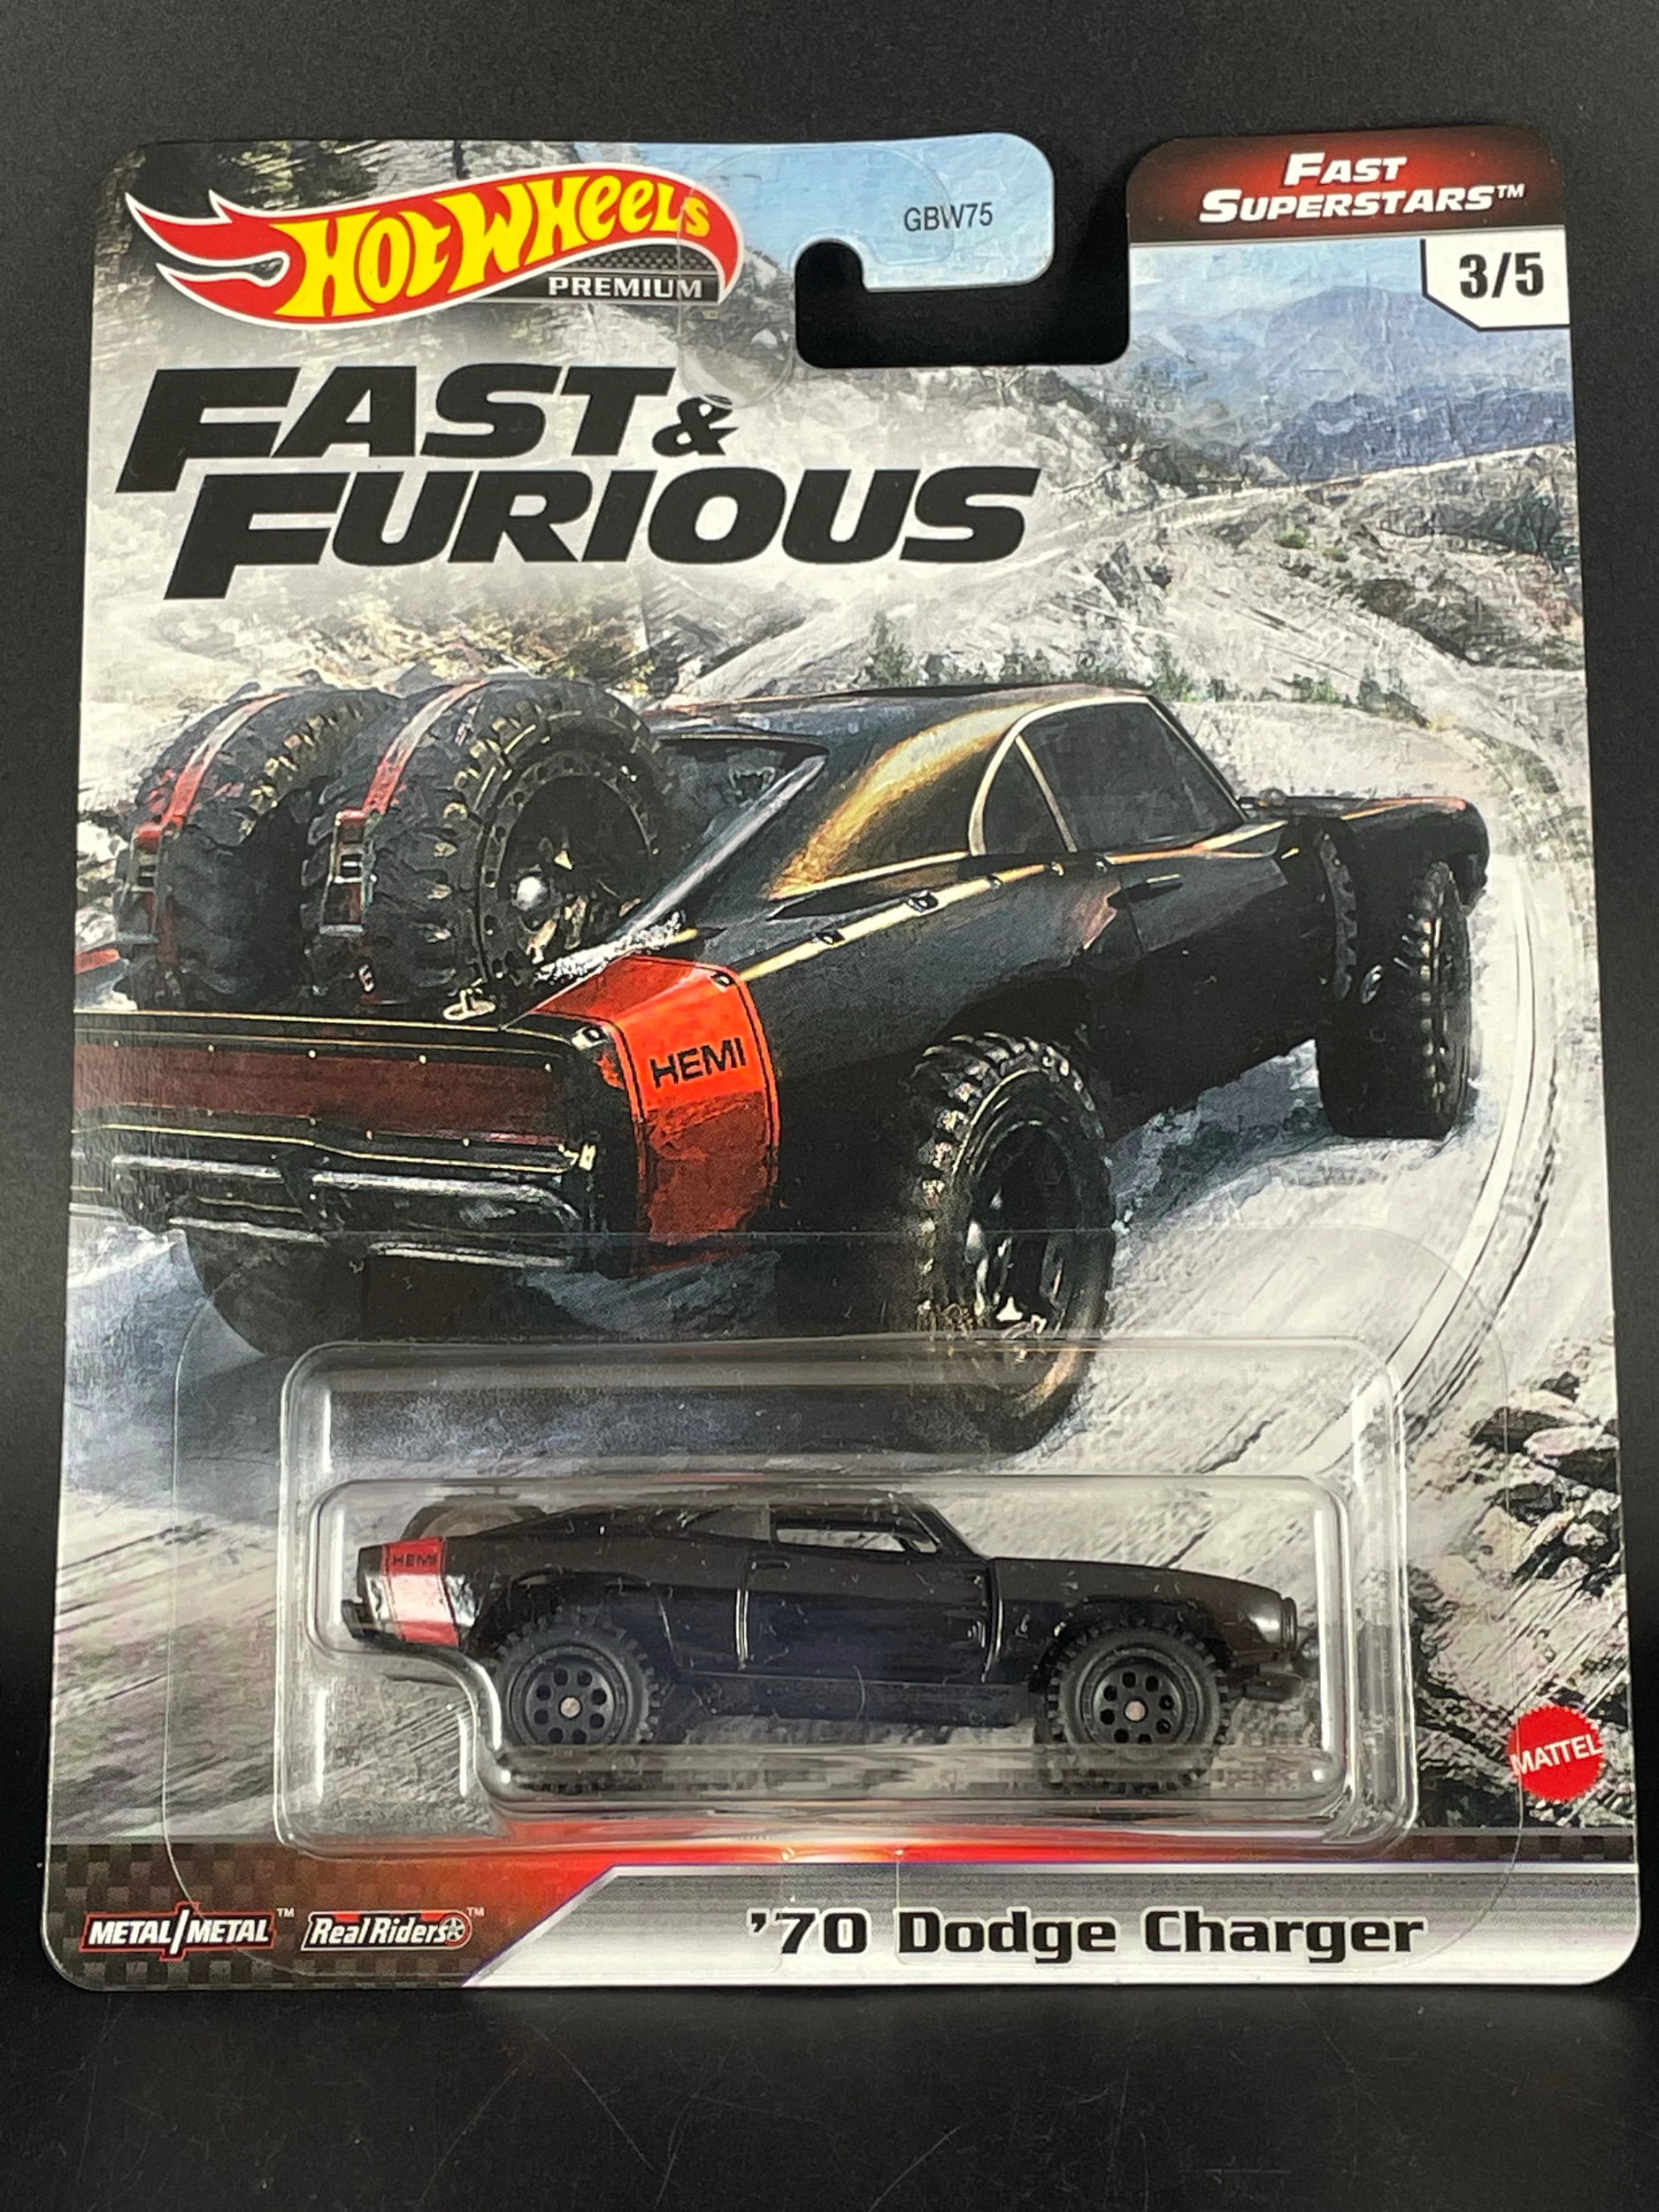 Dodge Charger Fast & Furious Fast Stars 1:64 Hot Wheels GRL71 GBW75 